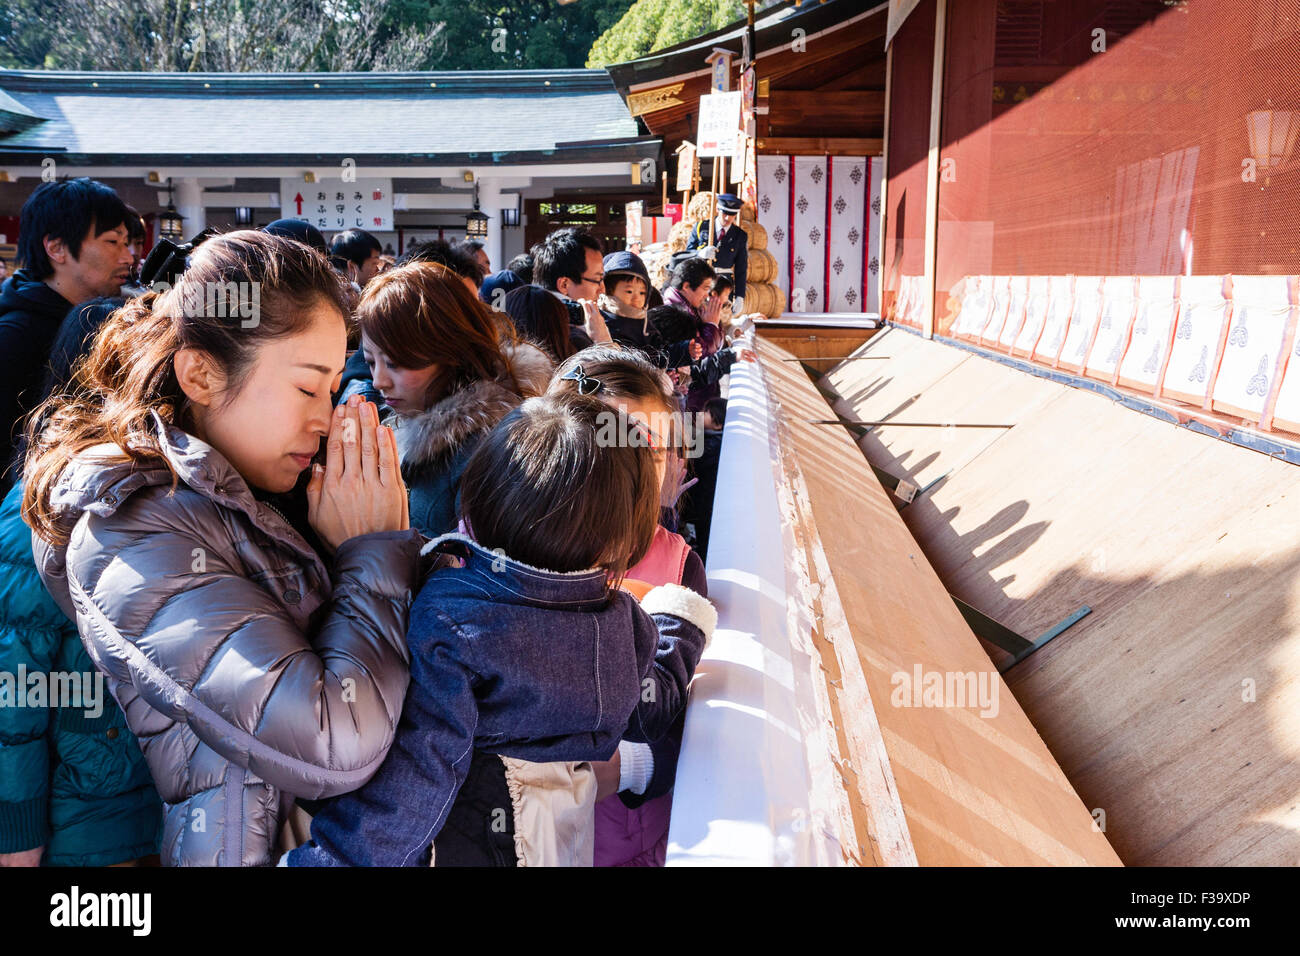 Japan, new year, winter. Japanese woman, mother, holding hands together and praying with two infant children at crowded Shinto shrine. Daytime. Stock Photo